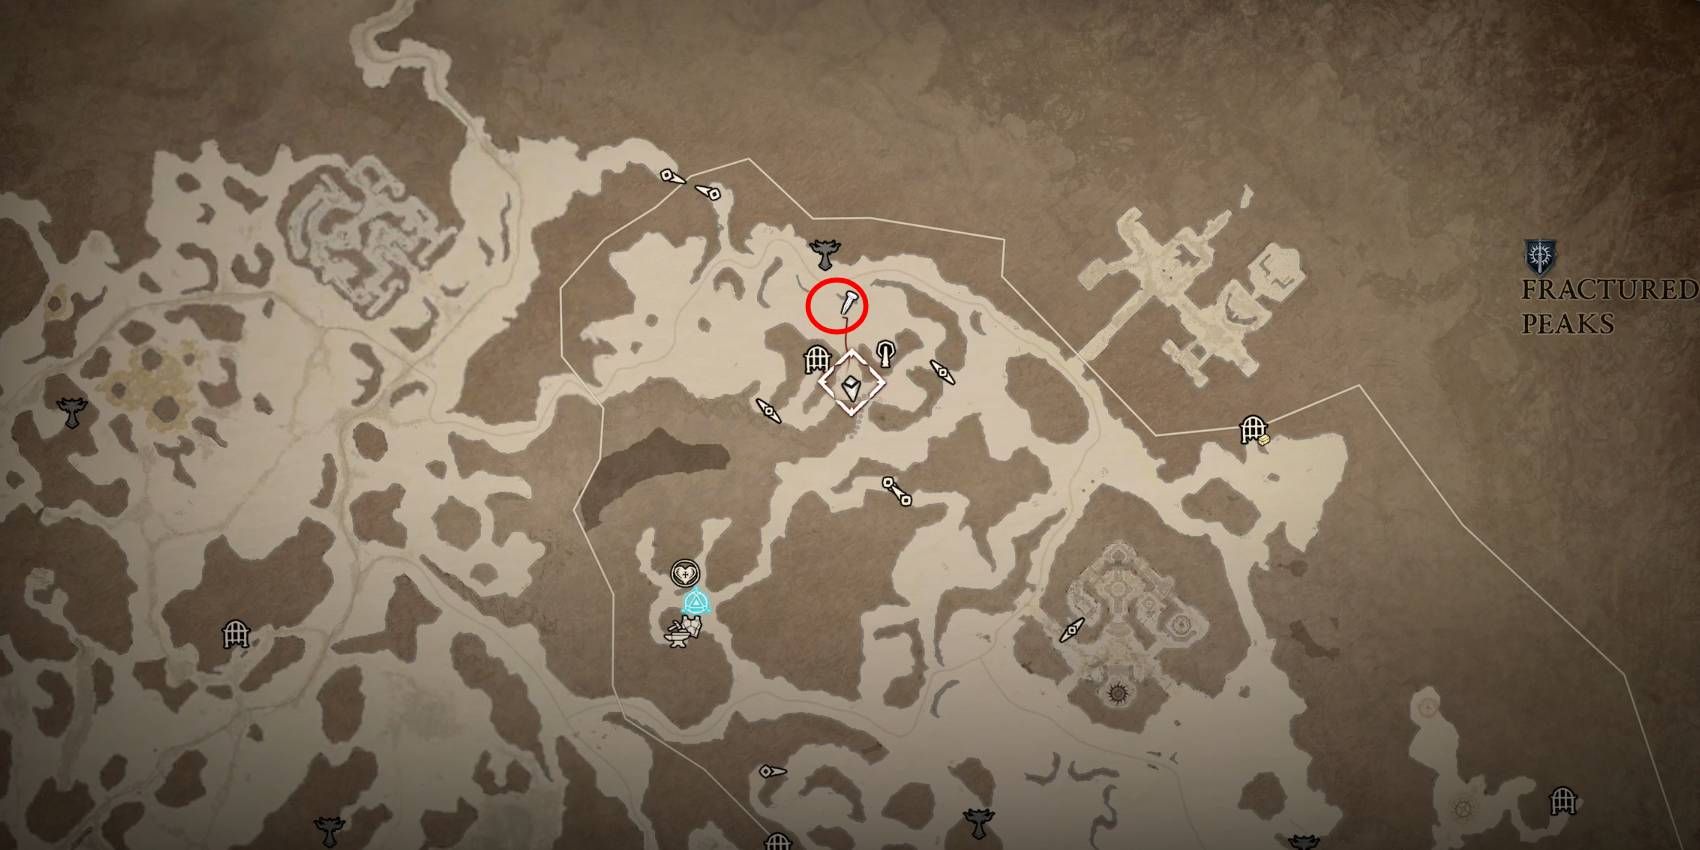 Diablo 4 Corlin Hule Rare Elite Location Marked in Red Circle on Map